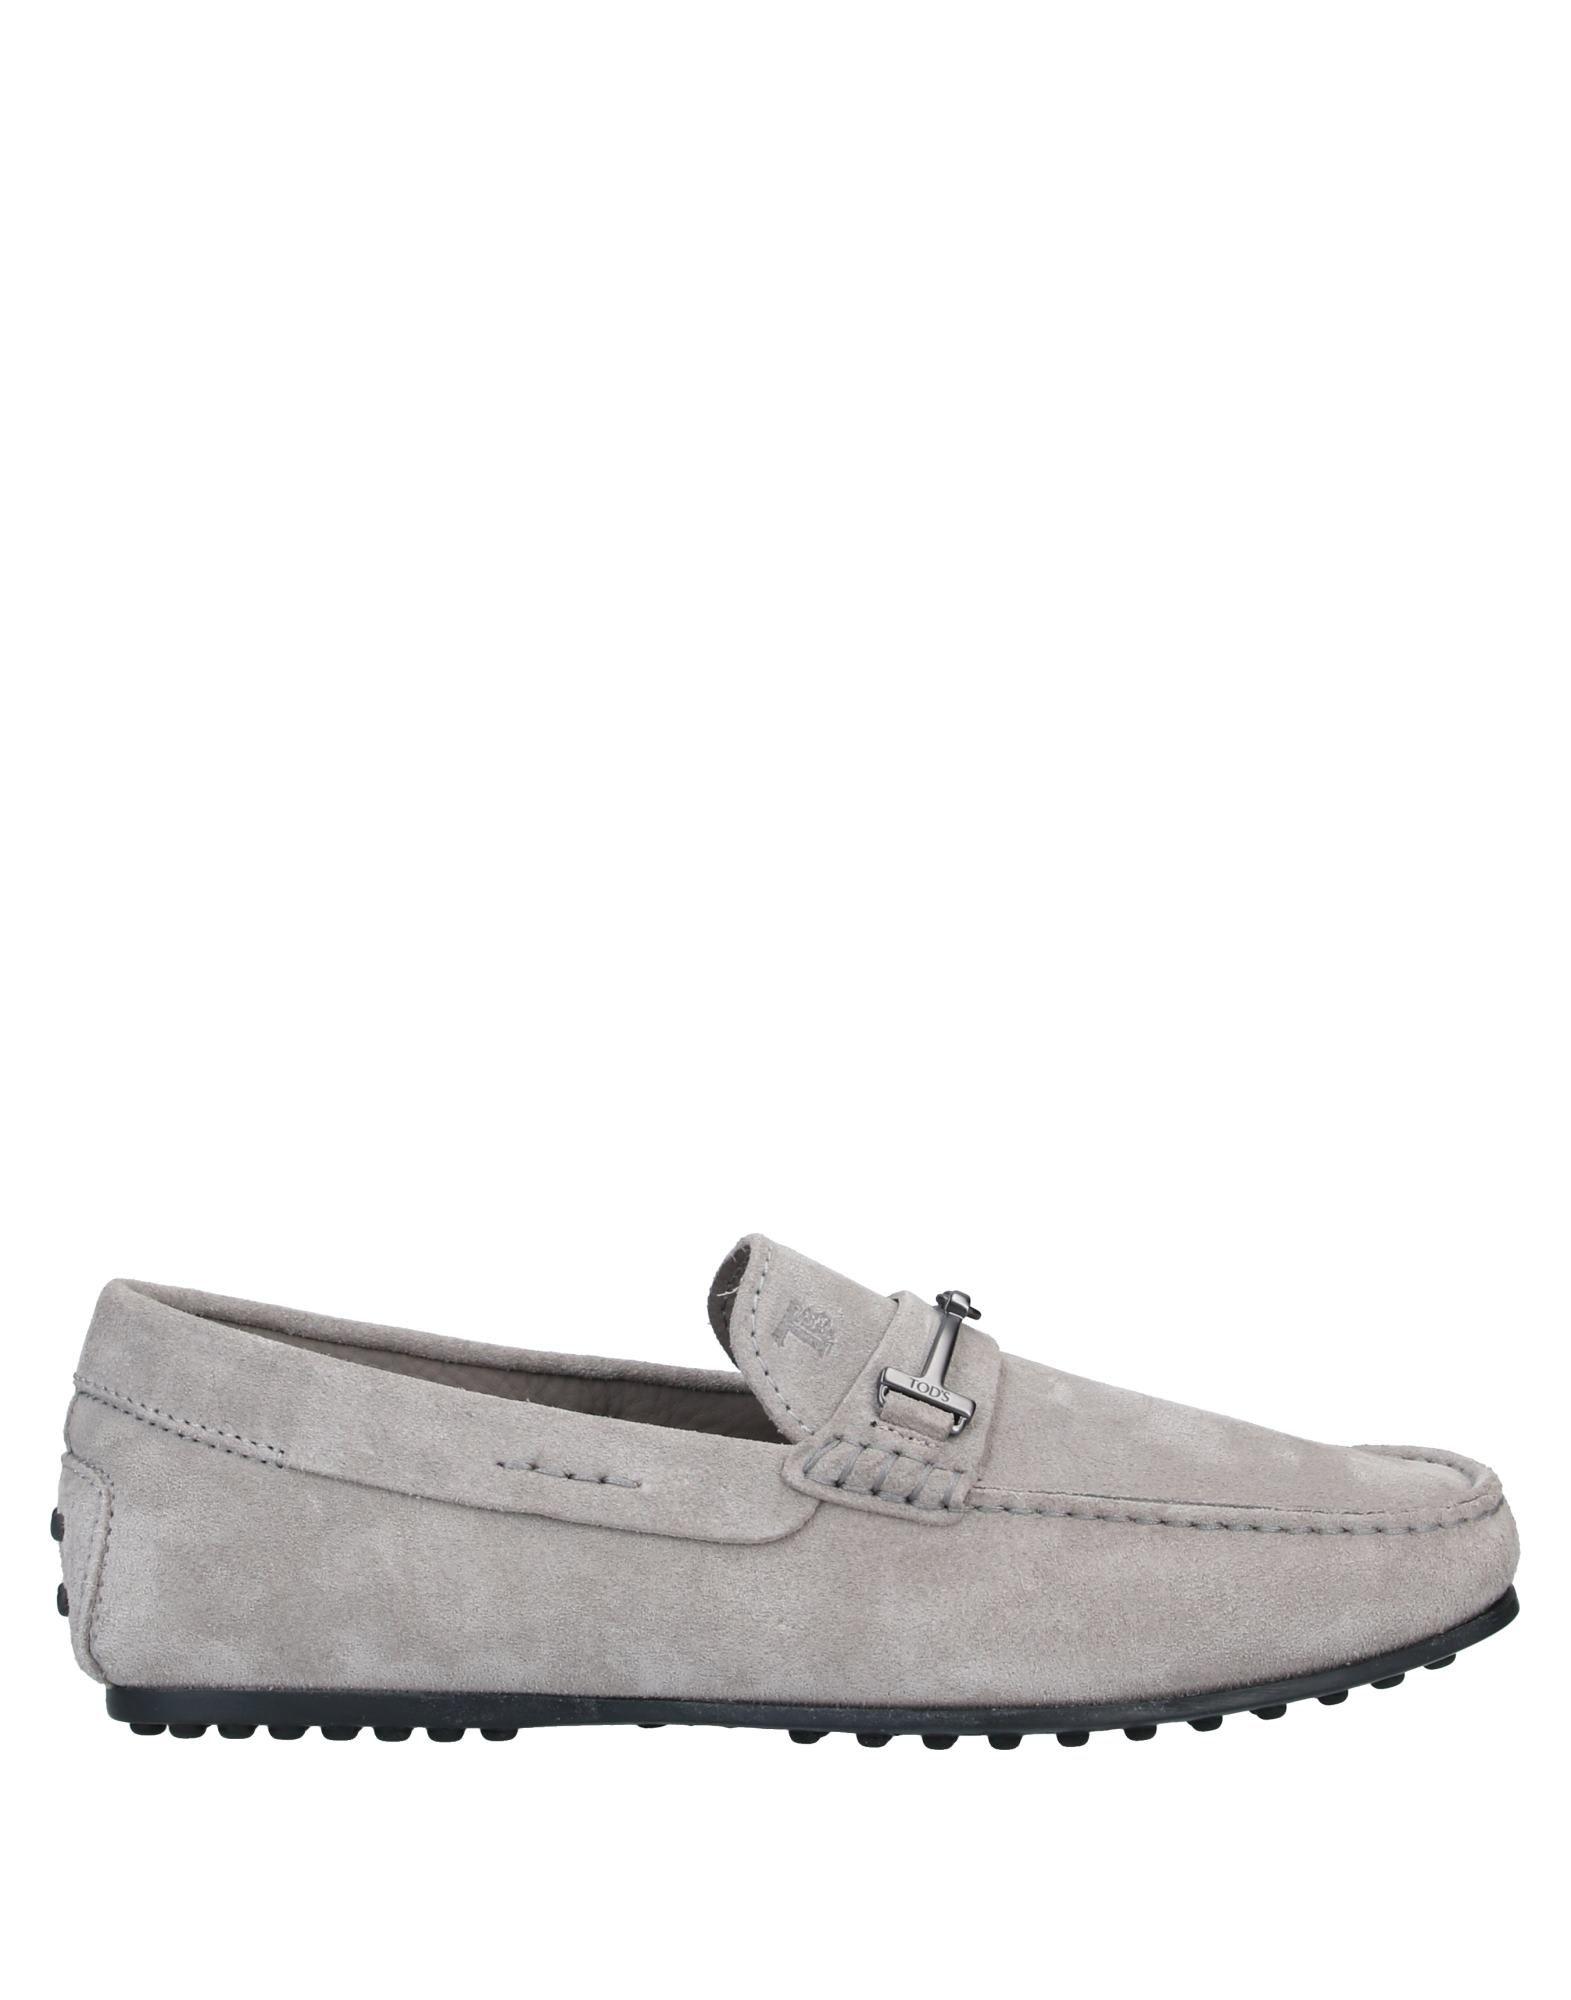 Tod's Leather Loafer in Light Grey (Gray) for Men - Lyst